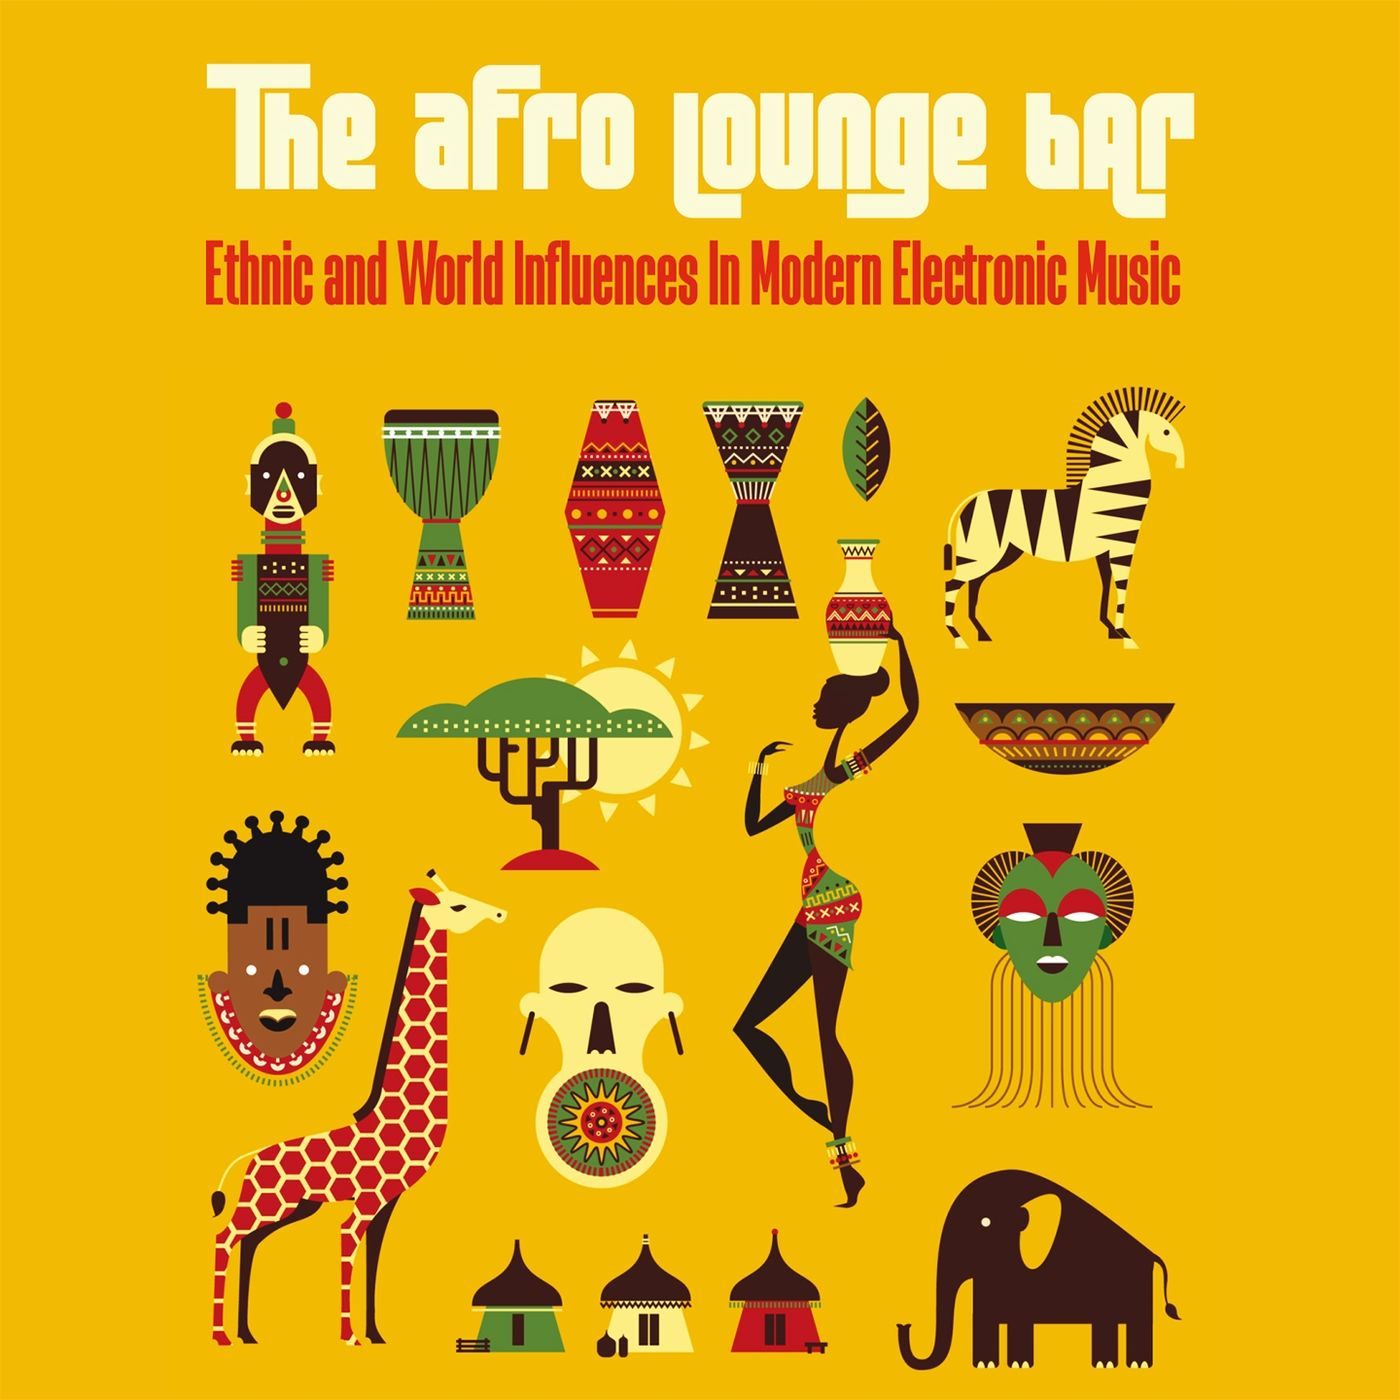 VA - The Afro Lounge Bar (Ethnic and World Influences in Modern Electronic Music) / Irma